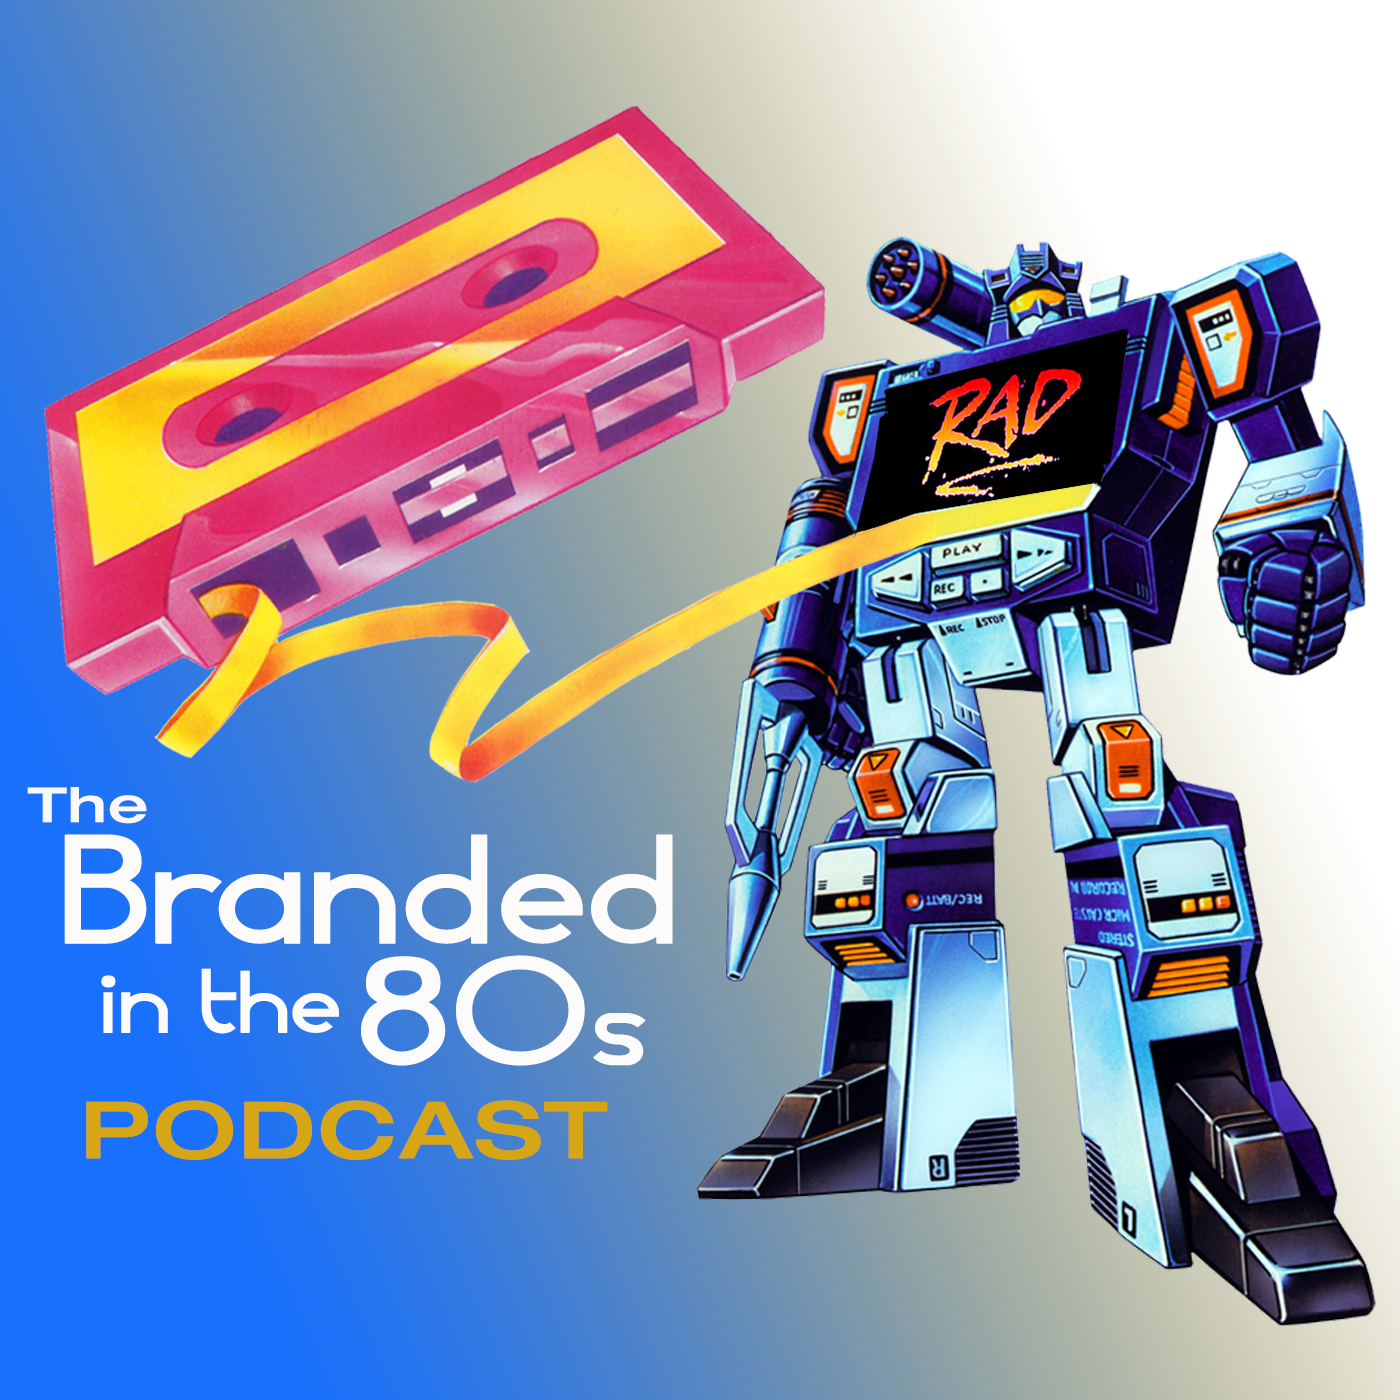 The All New Branded in the 80s Podcast, Episode 4!